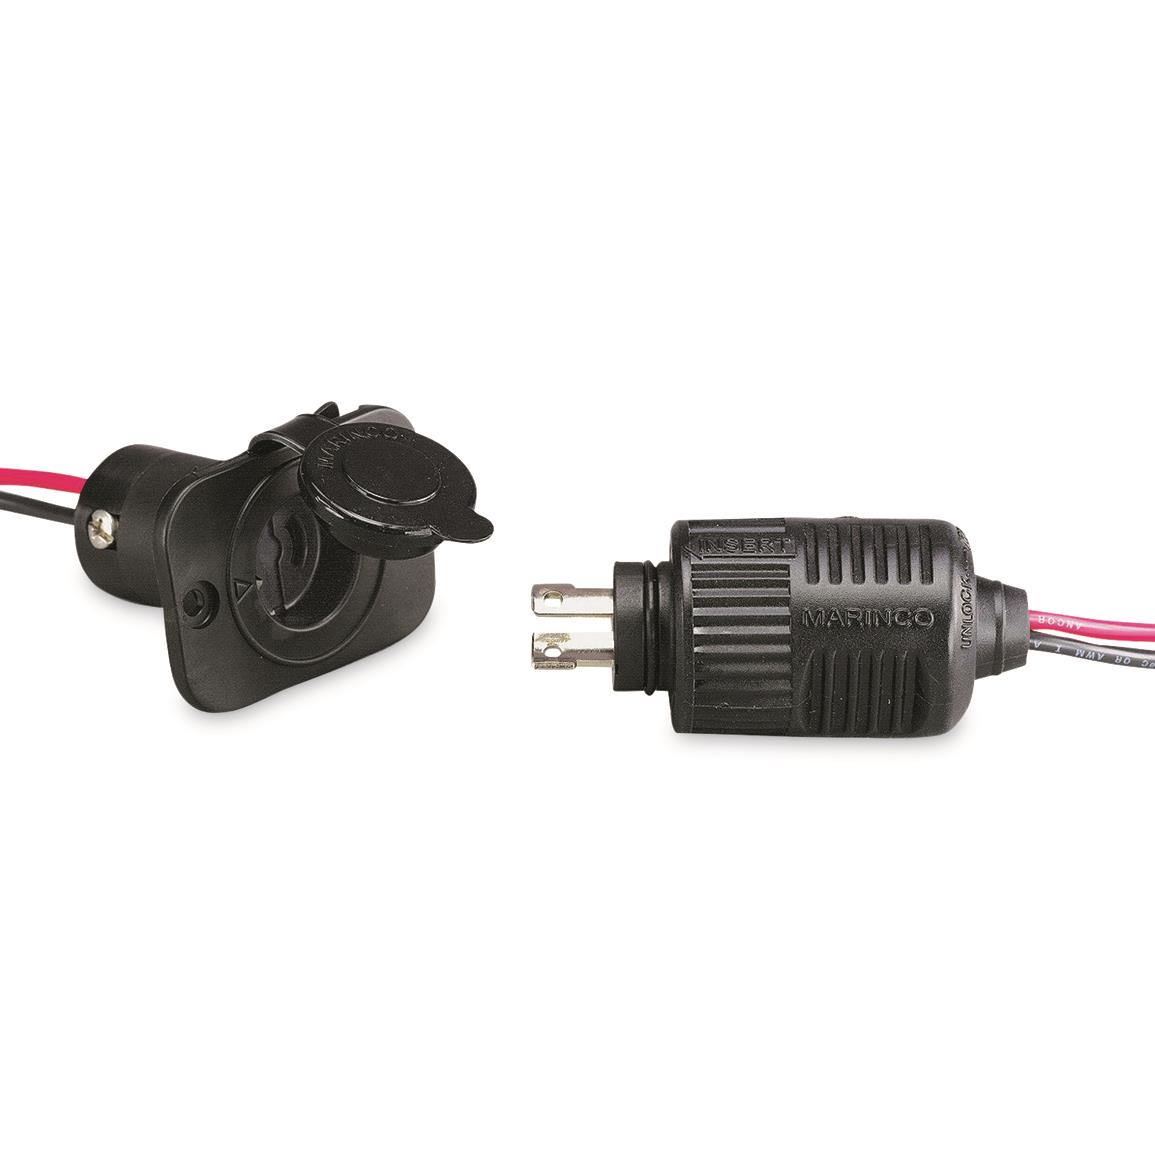 ConnectPro 40A Plug and Receptacle Kit